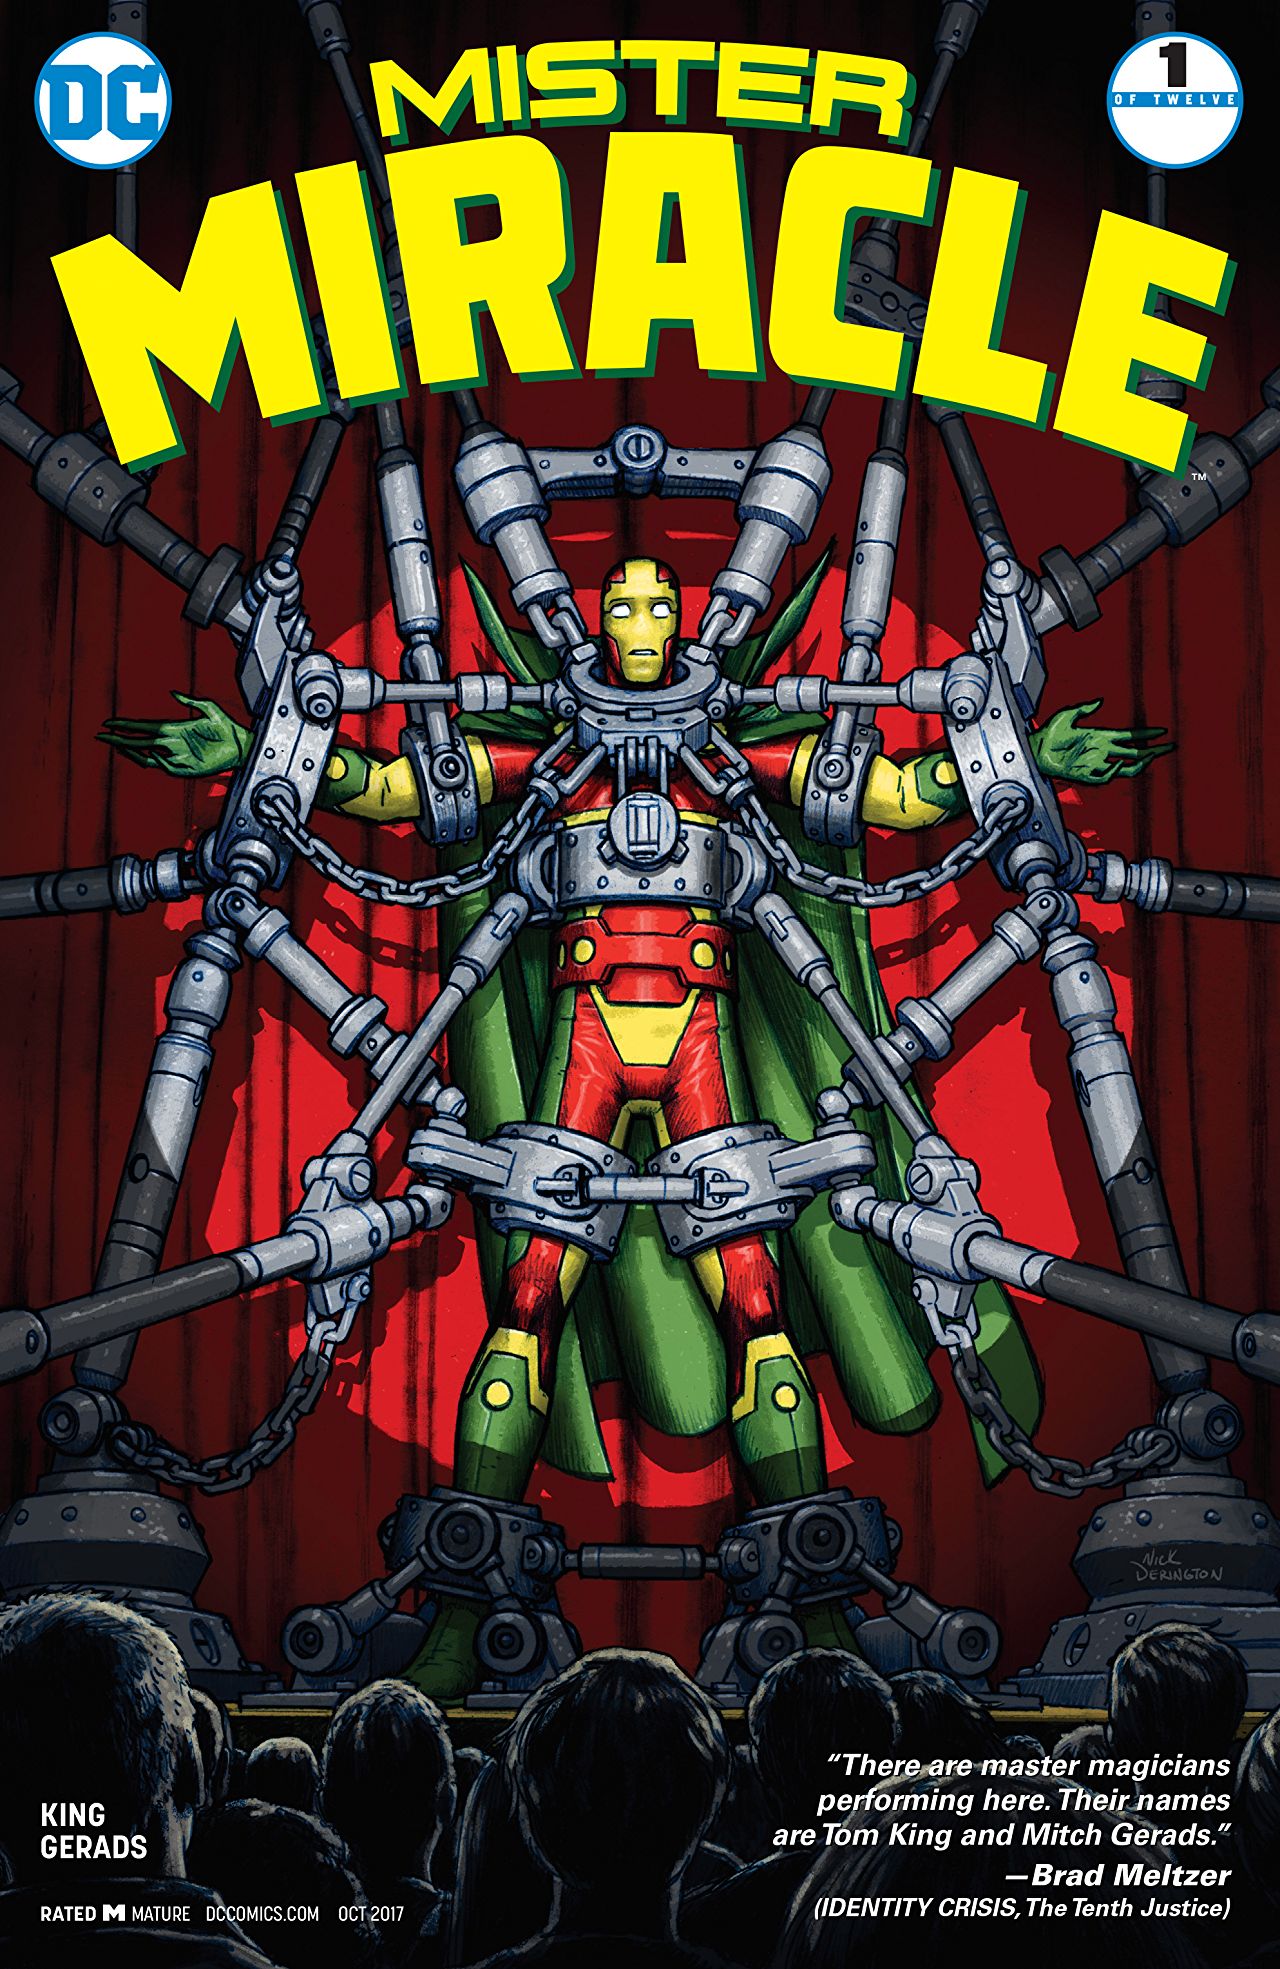 Mister_Miracle_Vol_4_1